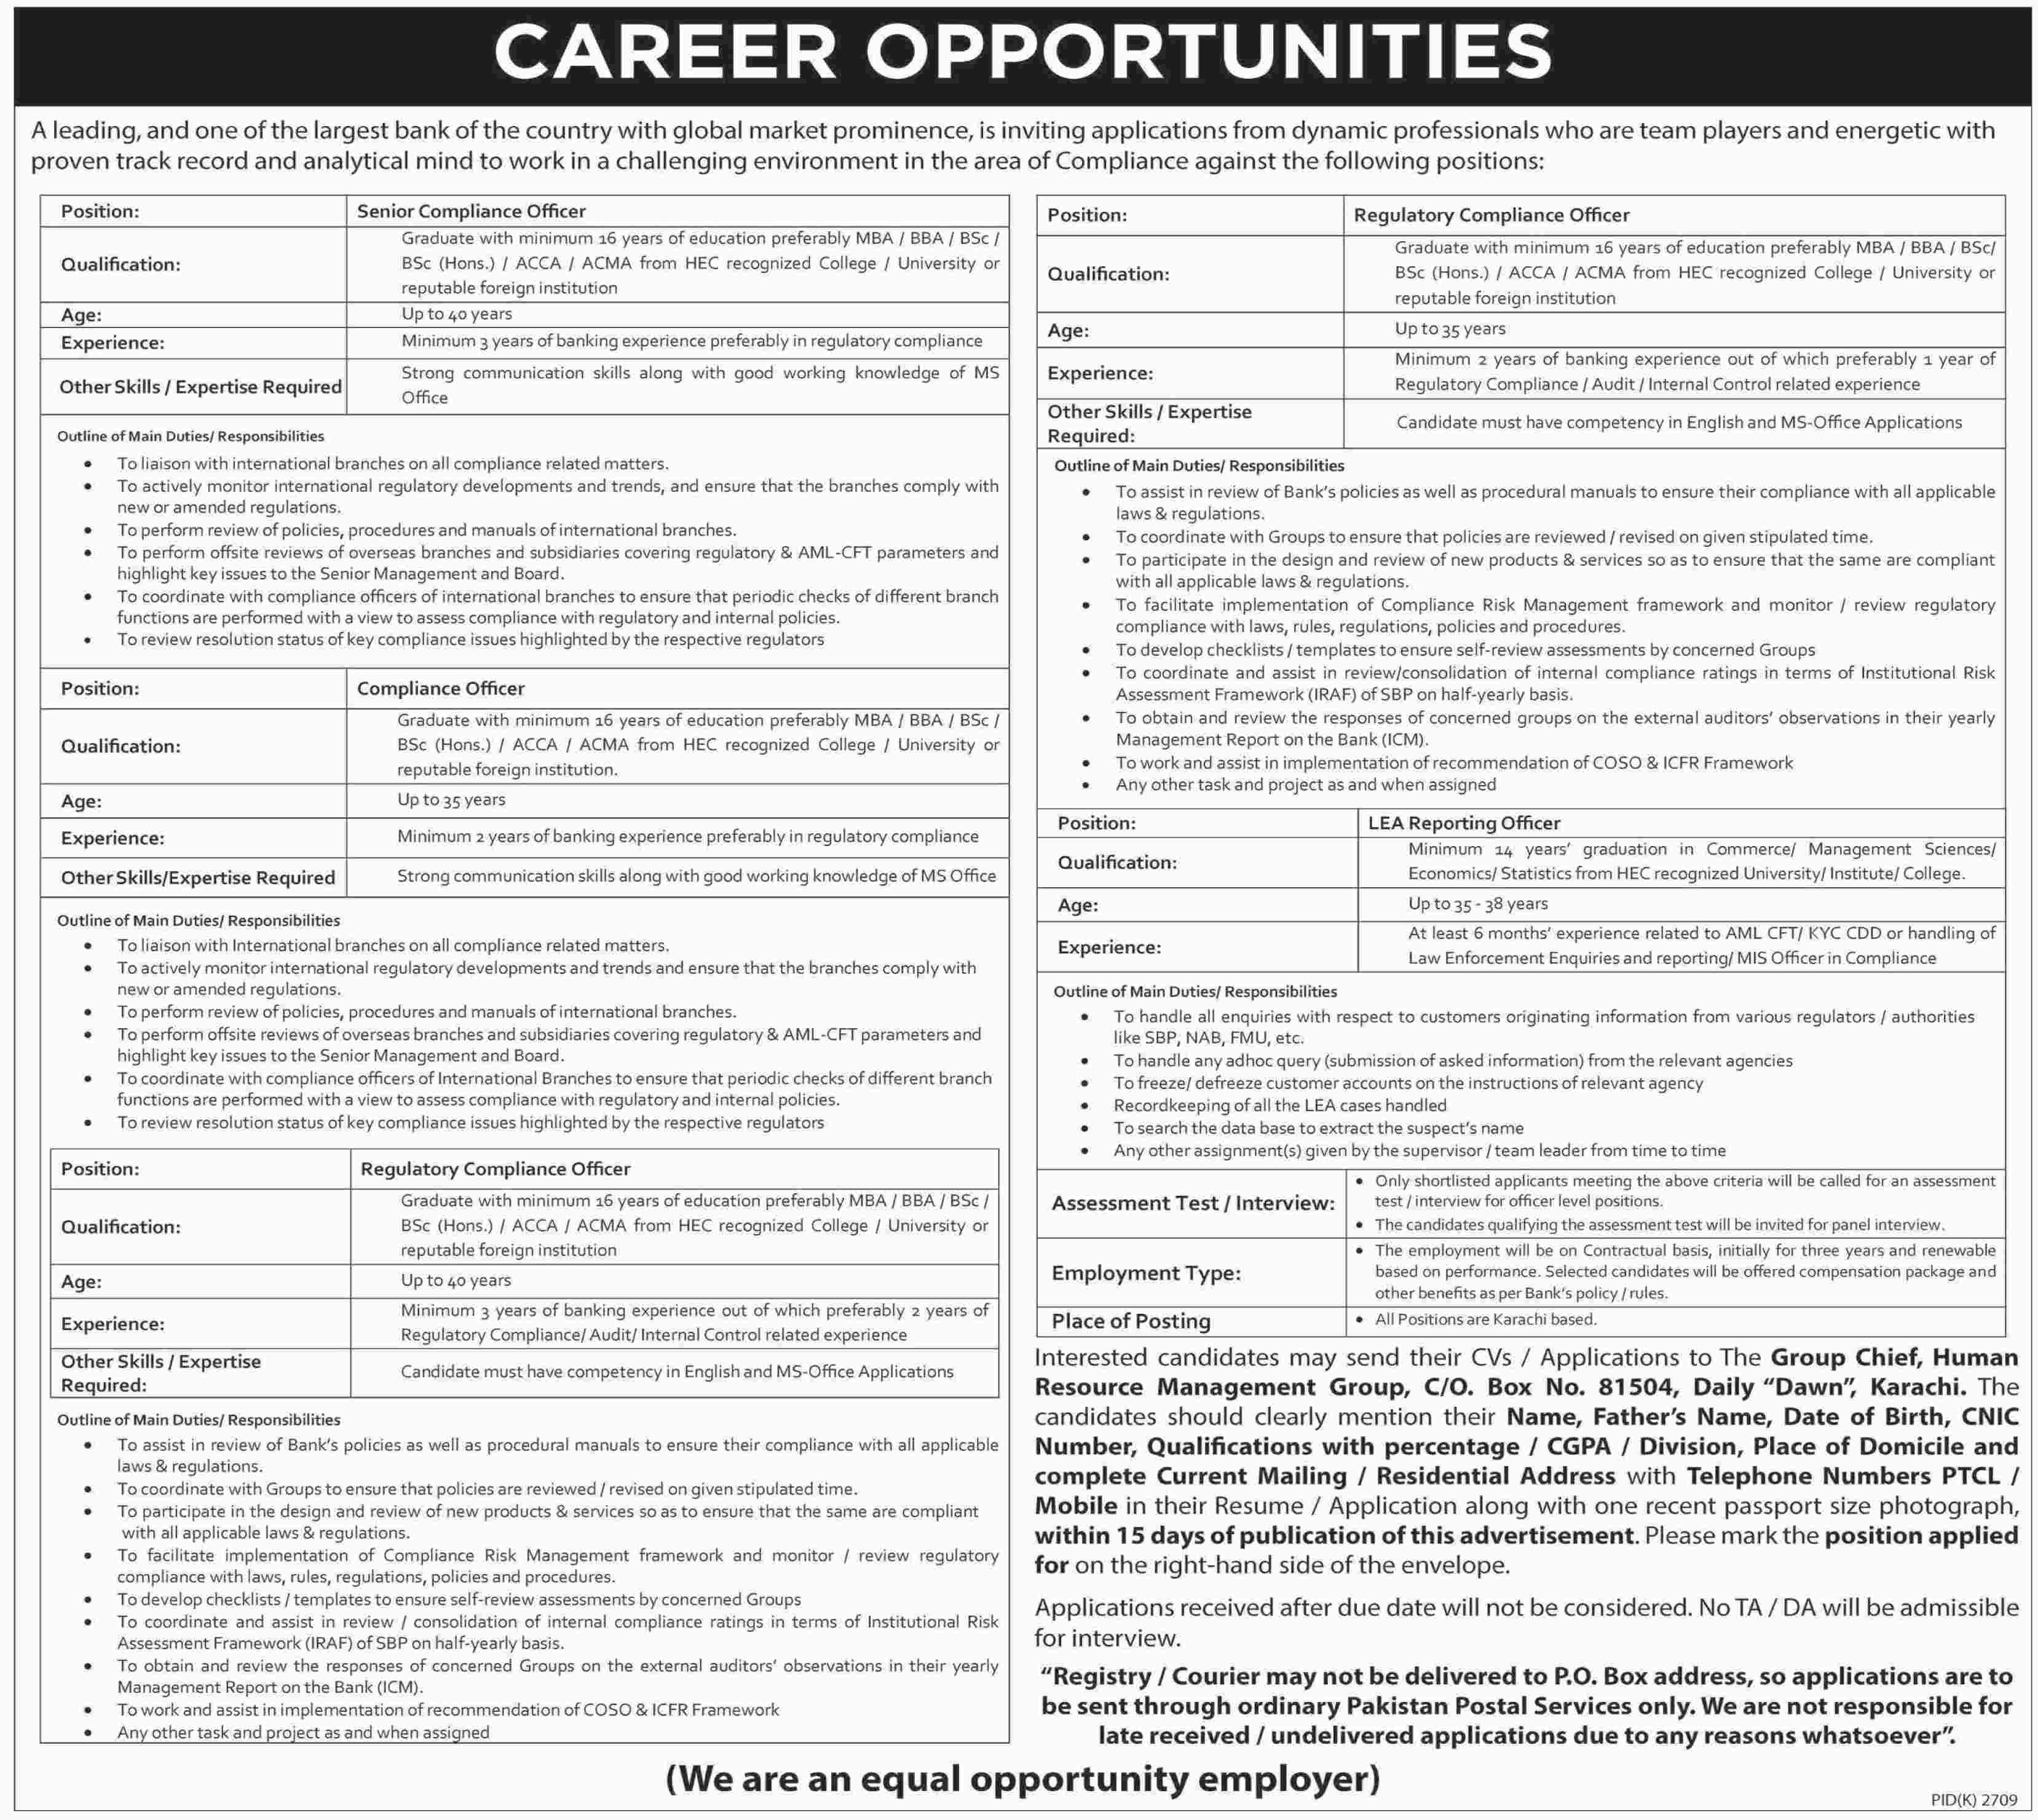 Jobs for Compliance Officer and LEA Reporting Officer 21 Jan 2018